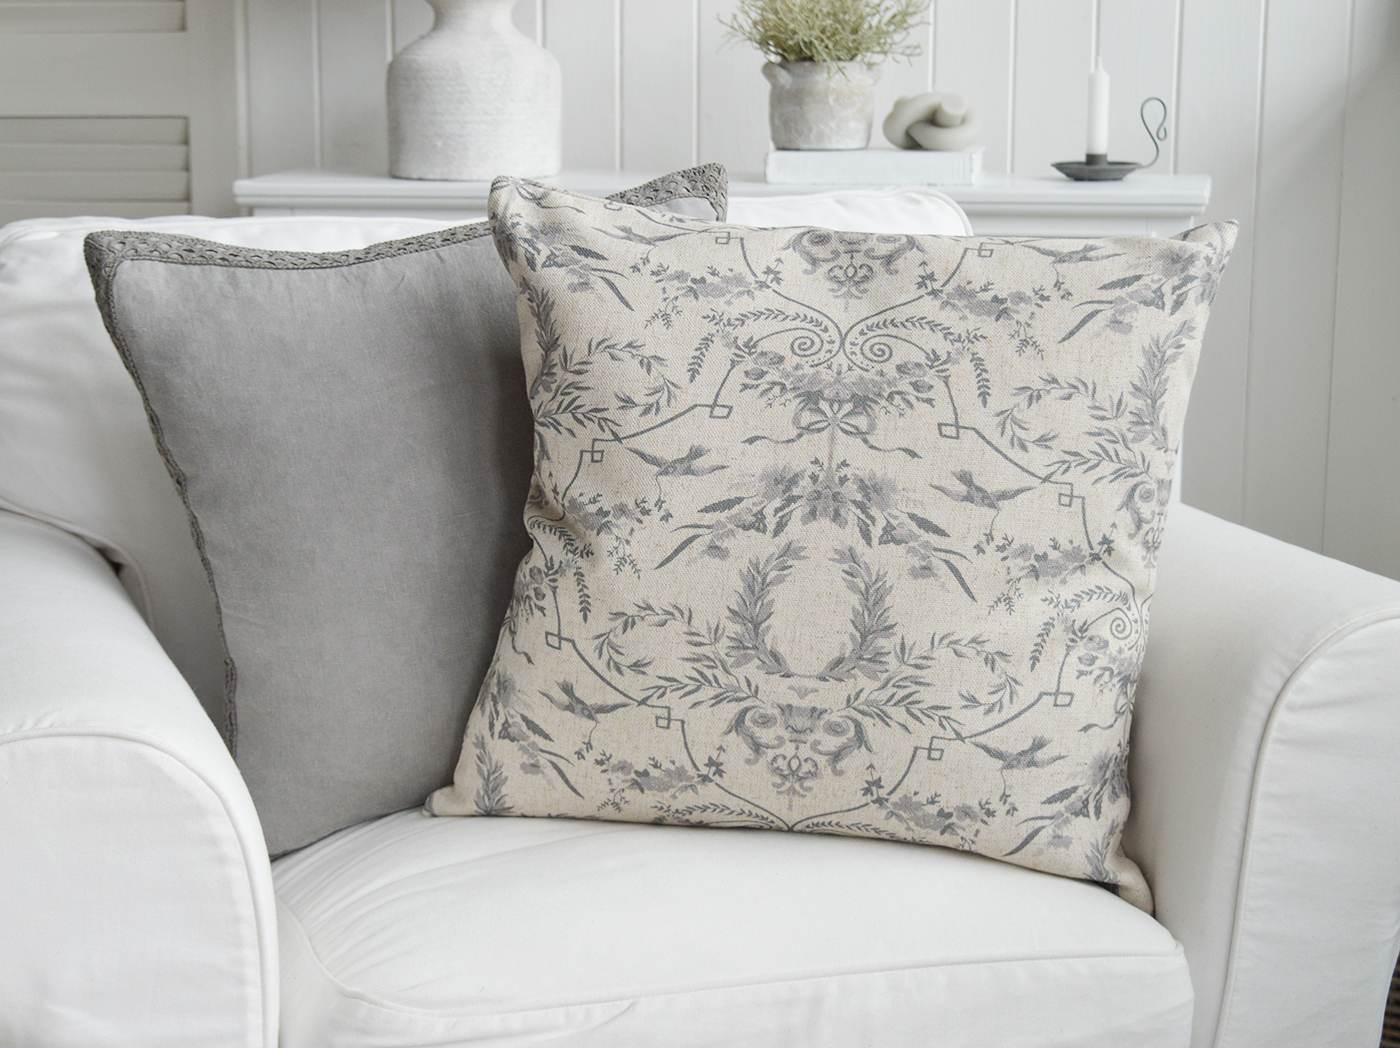 Serenity Luxury Cushion - New England, Hamptons, Modern Farmhouse and Country and coastal cushions and interiors